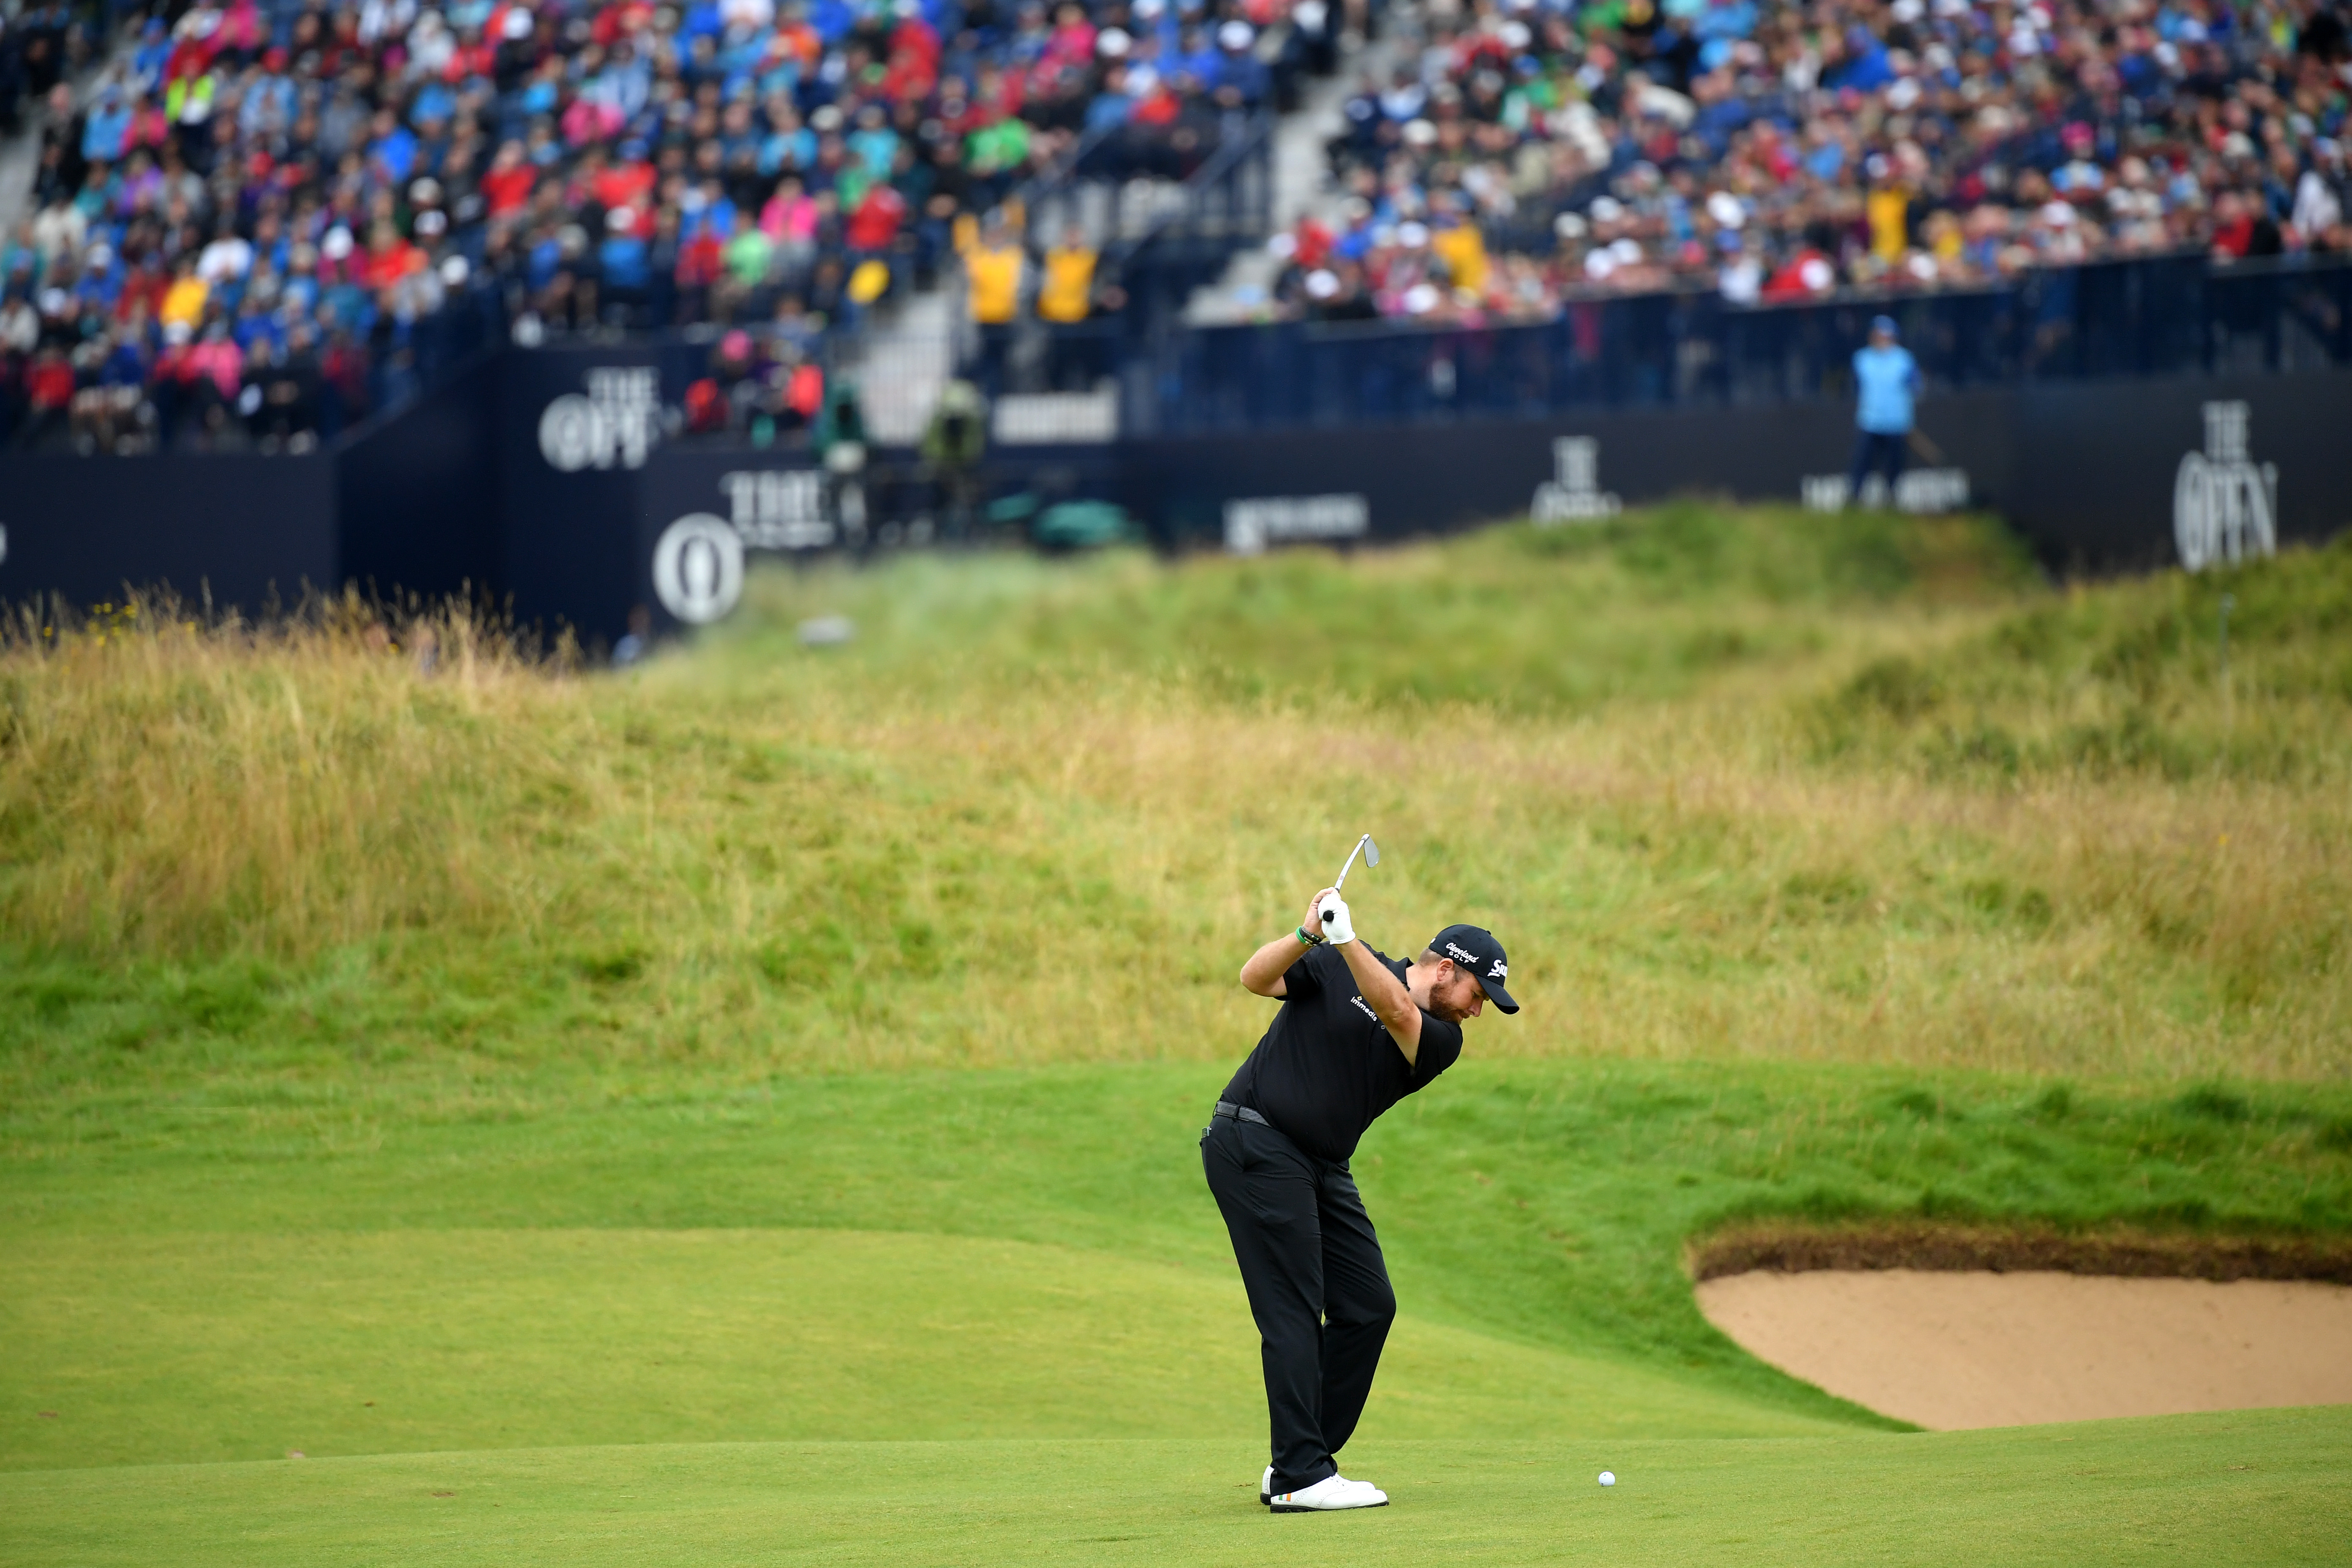 Shane Lowry of Ireland plays his second shot on the 18th hole.